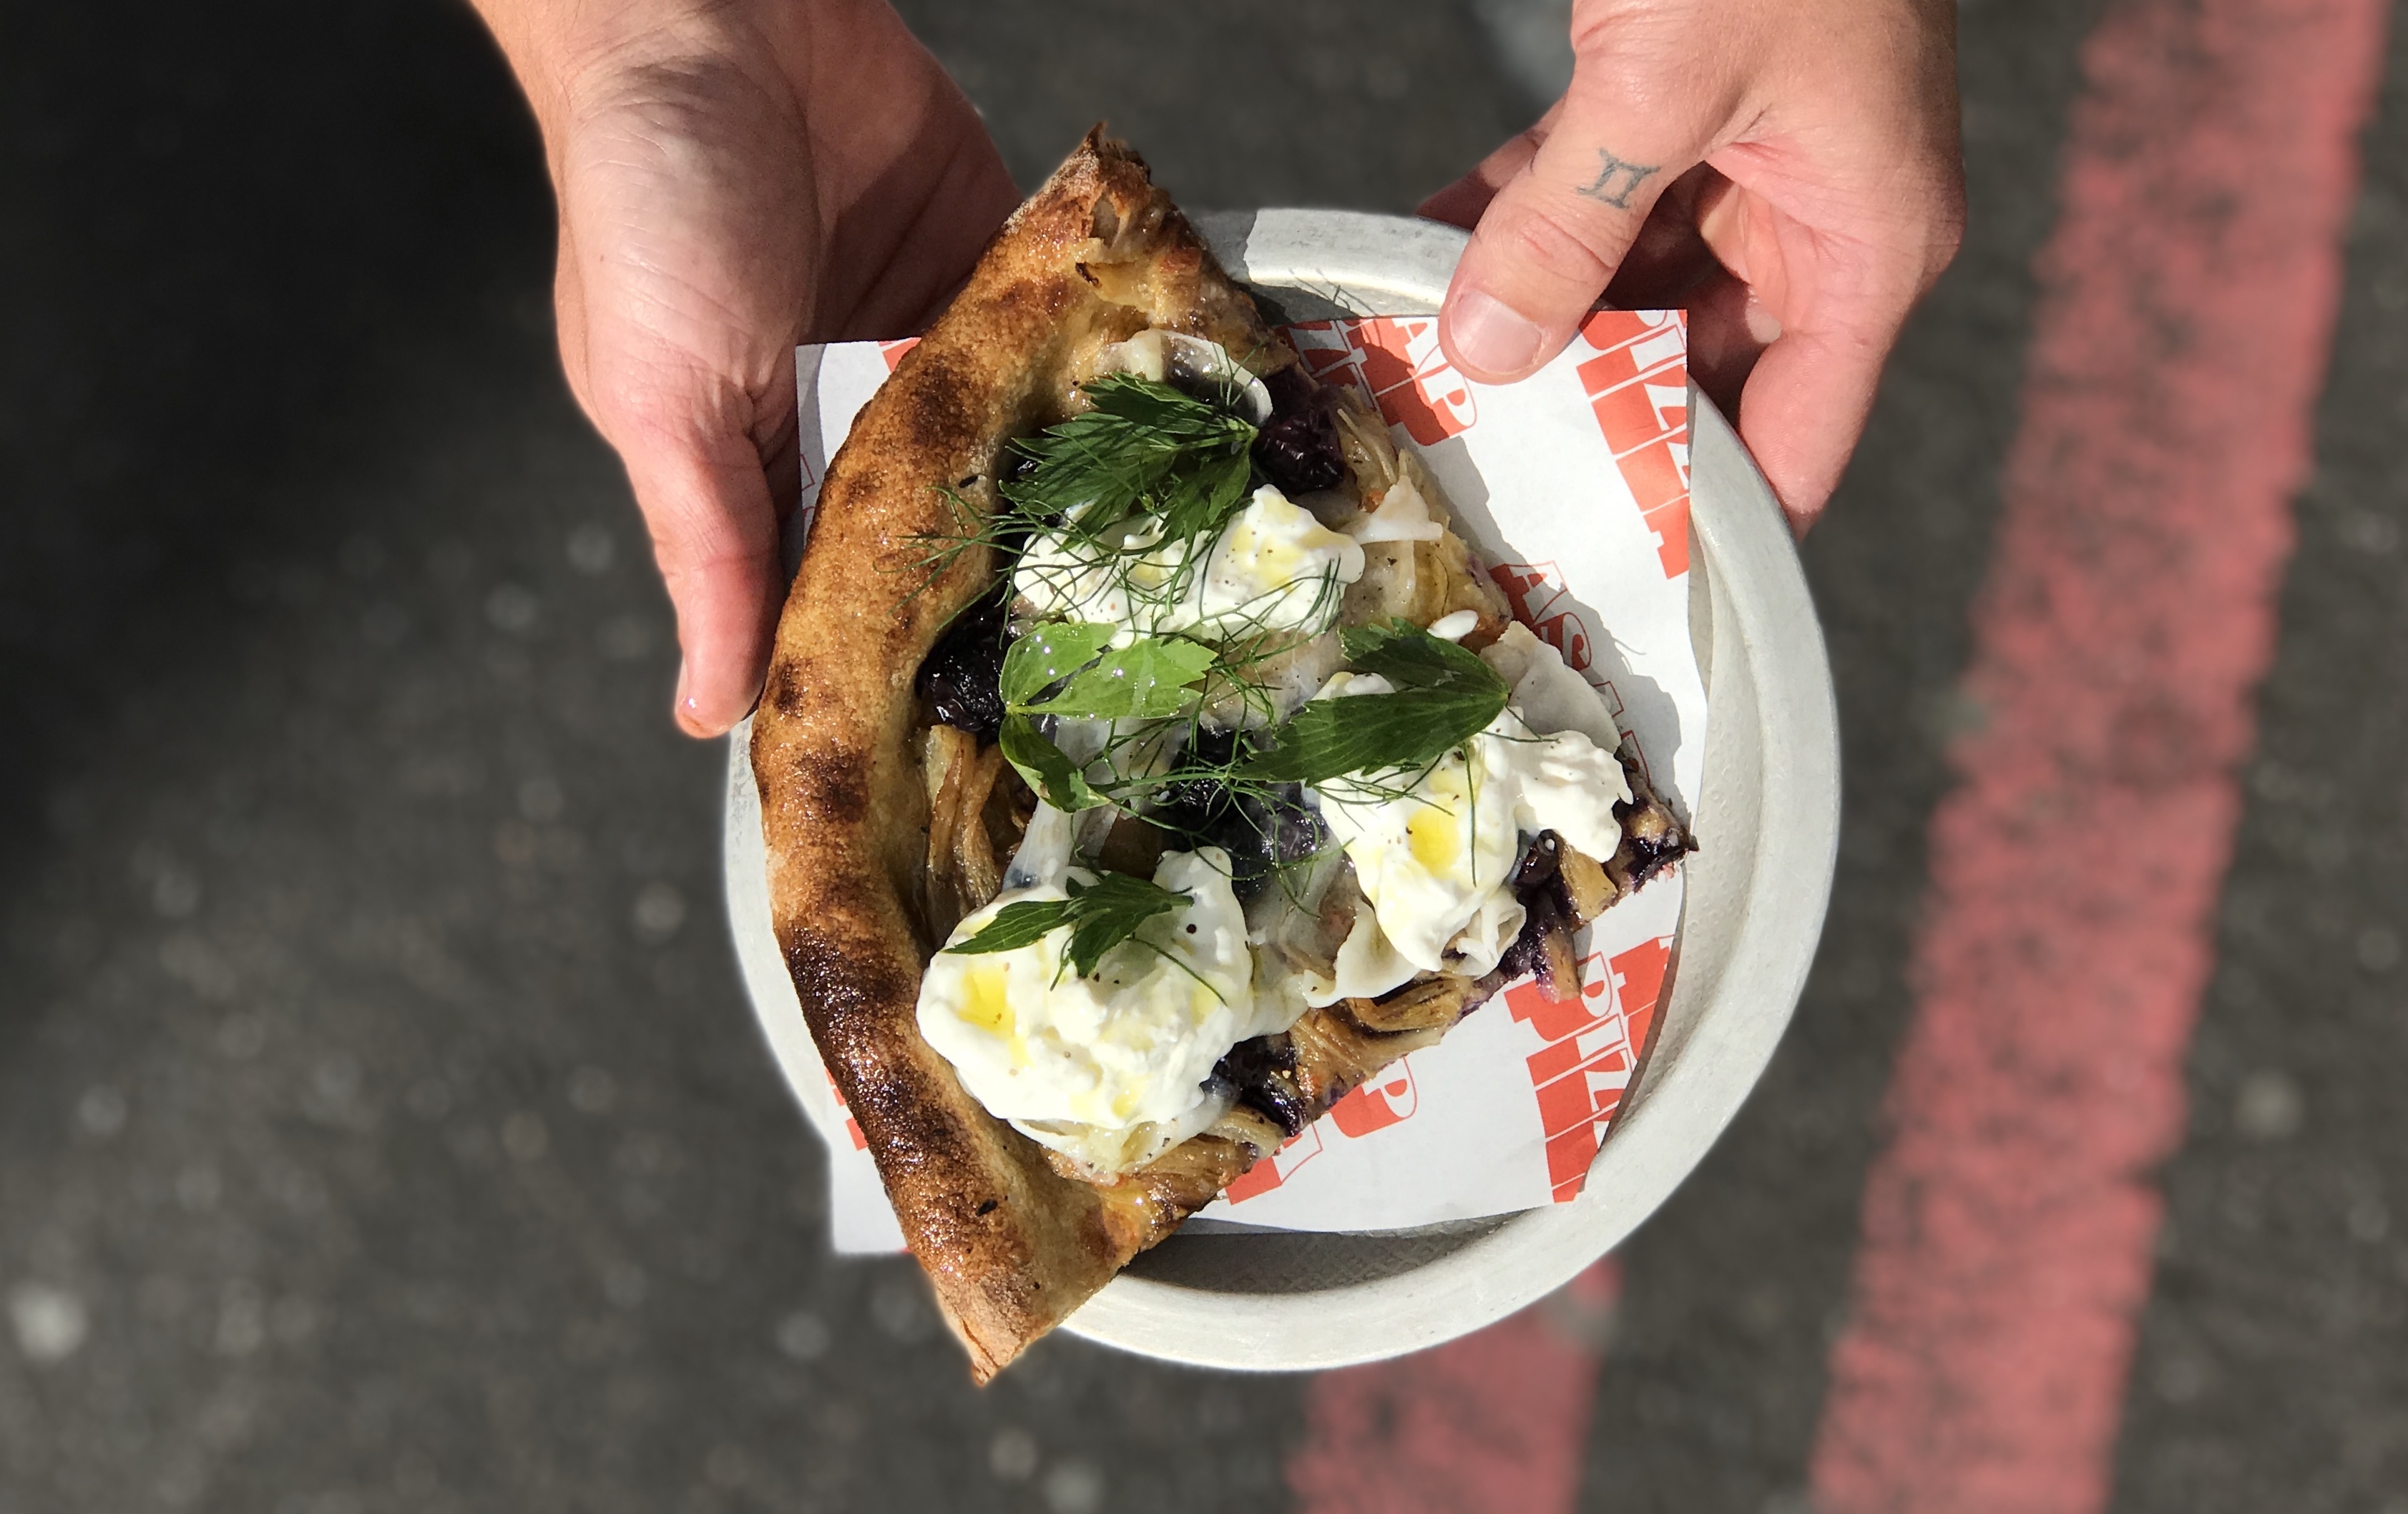 ASAP Pizza Borough Market shows off a slice of pizza with fragola grape, stracciatella, and fennel fronds held from a birdseye view over a road